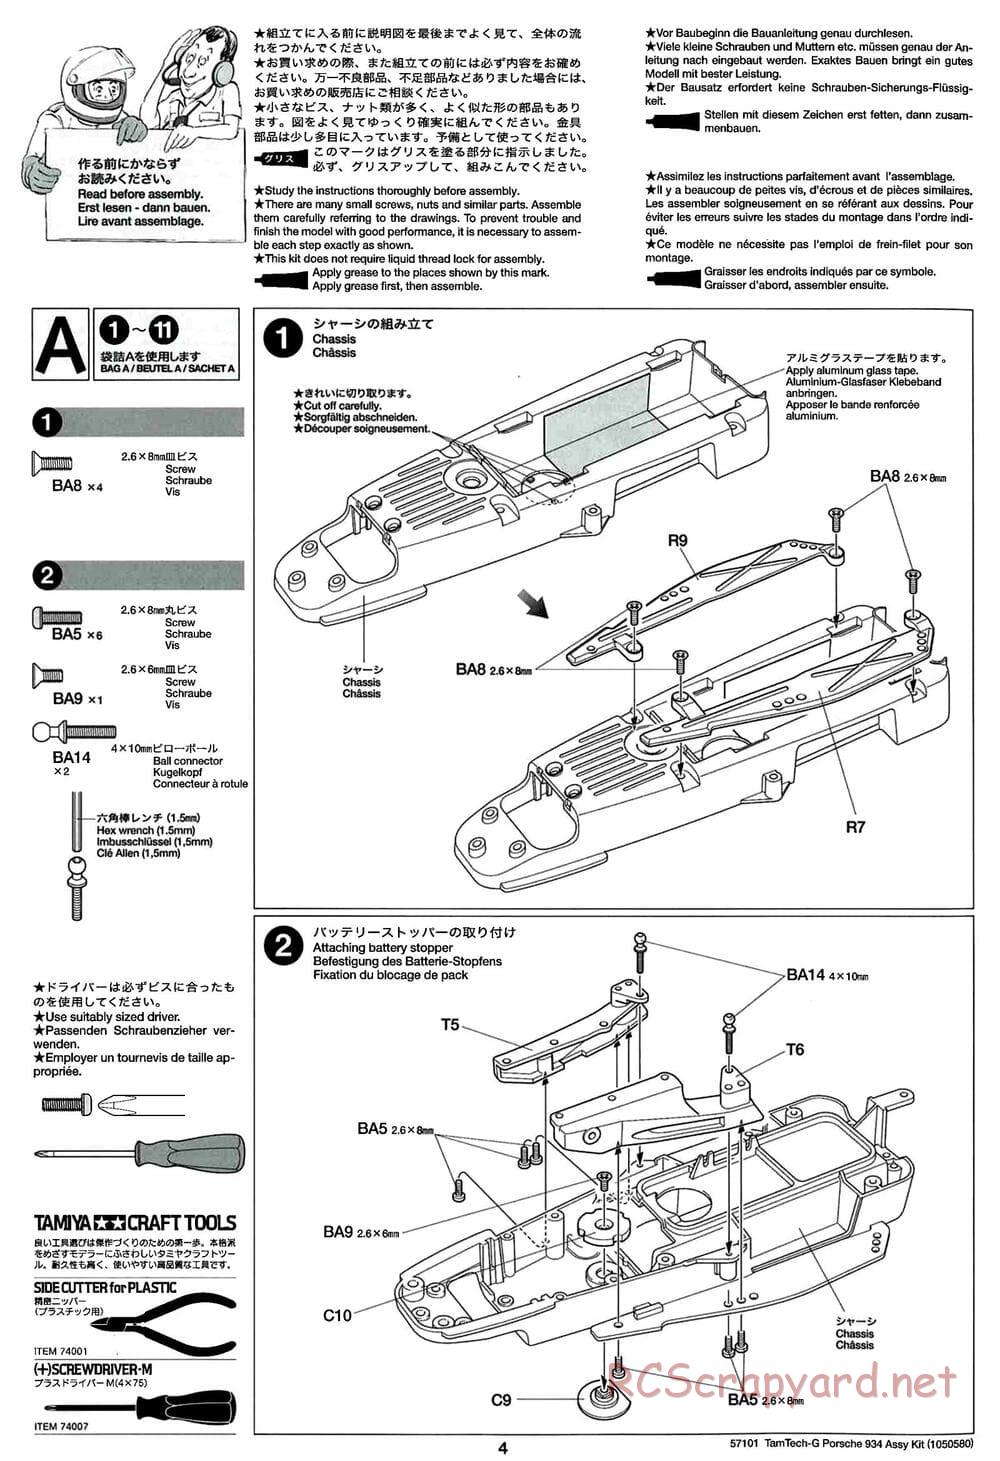 Tamiya - Porsche Turbo RSR - GT-01 Chassis - Manual - Page 4